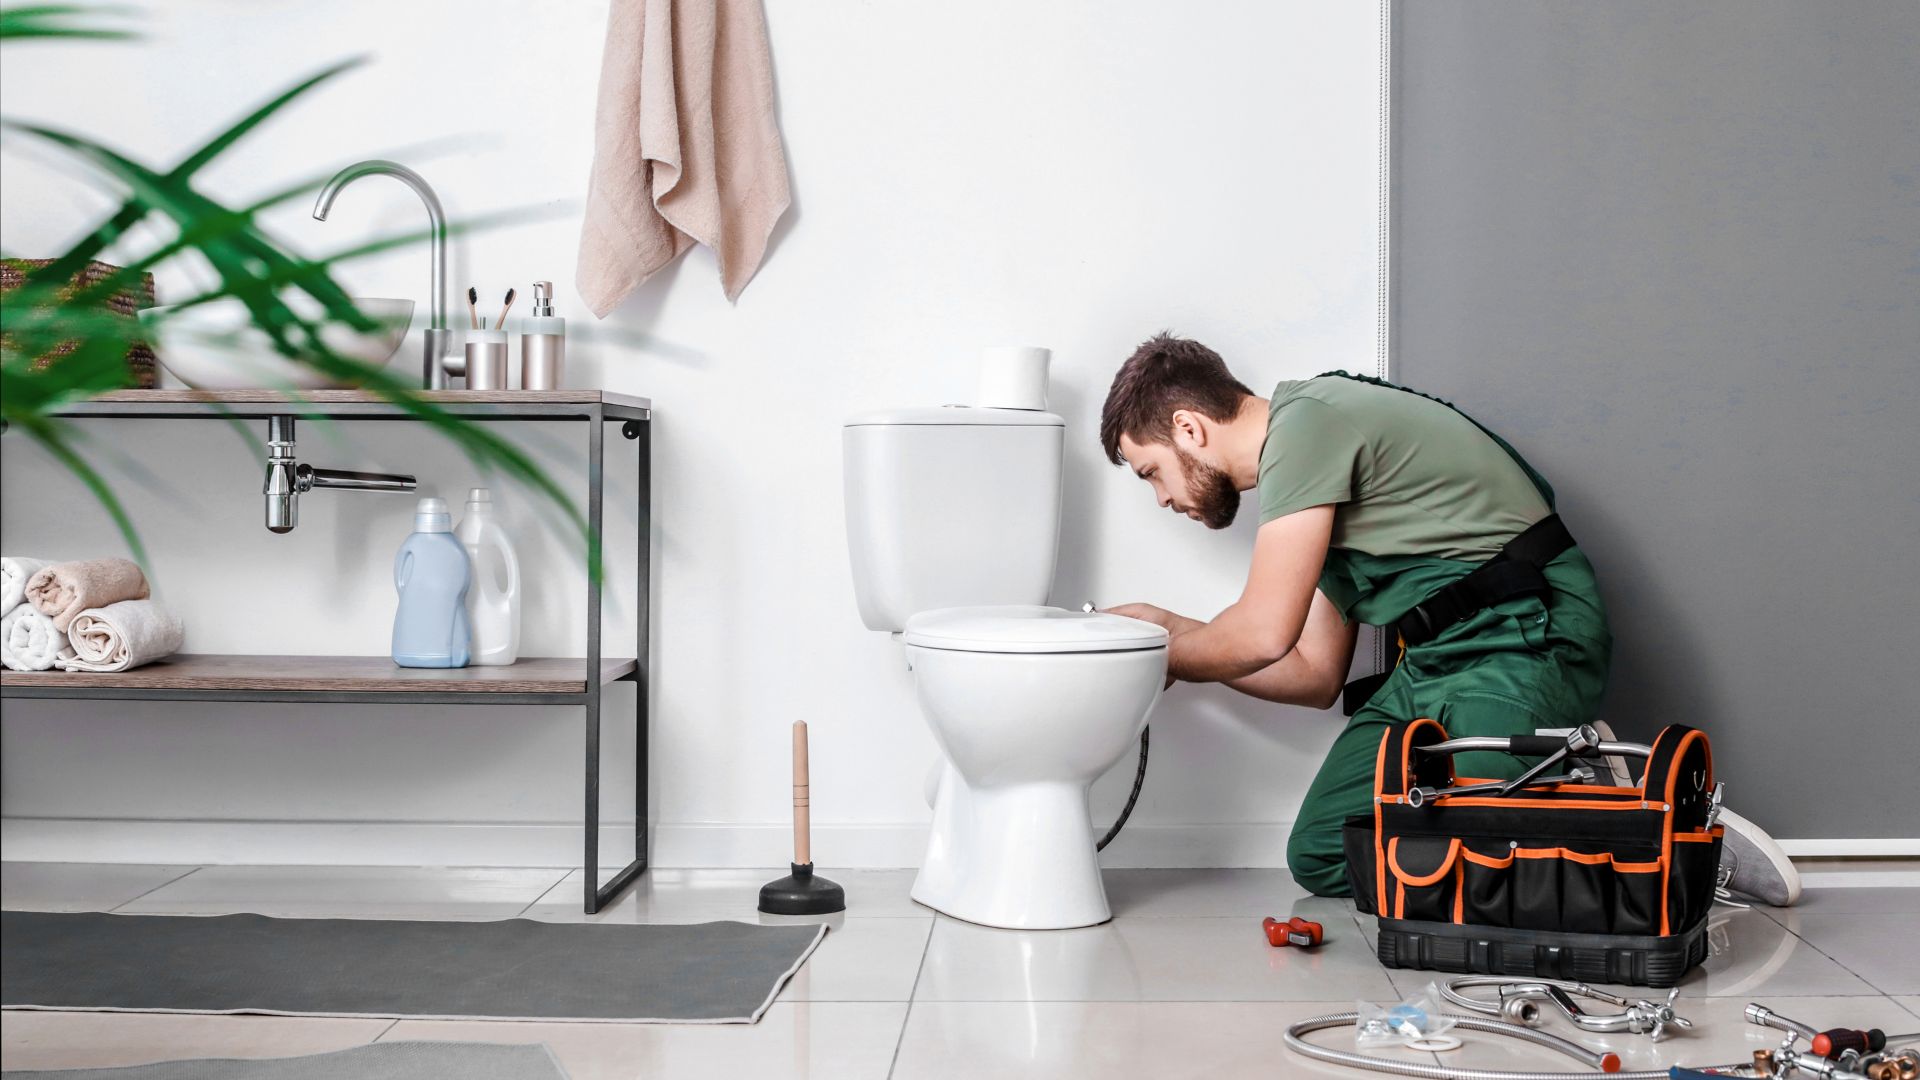 Contact CAN Plumbing and Drainage for All Your Toilet Needs with Expert Plumbers